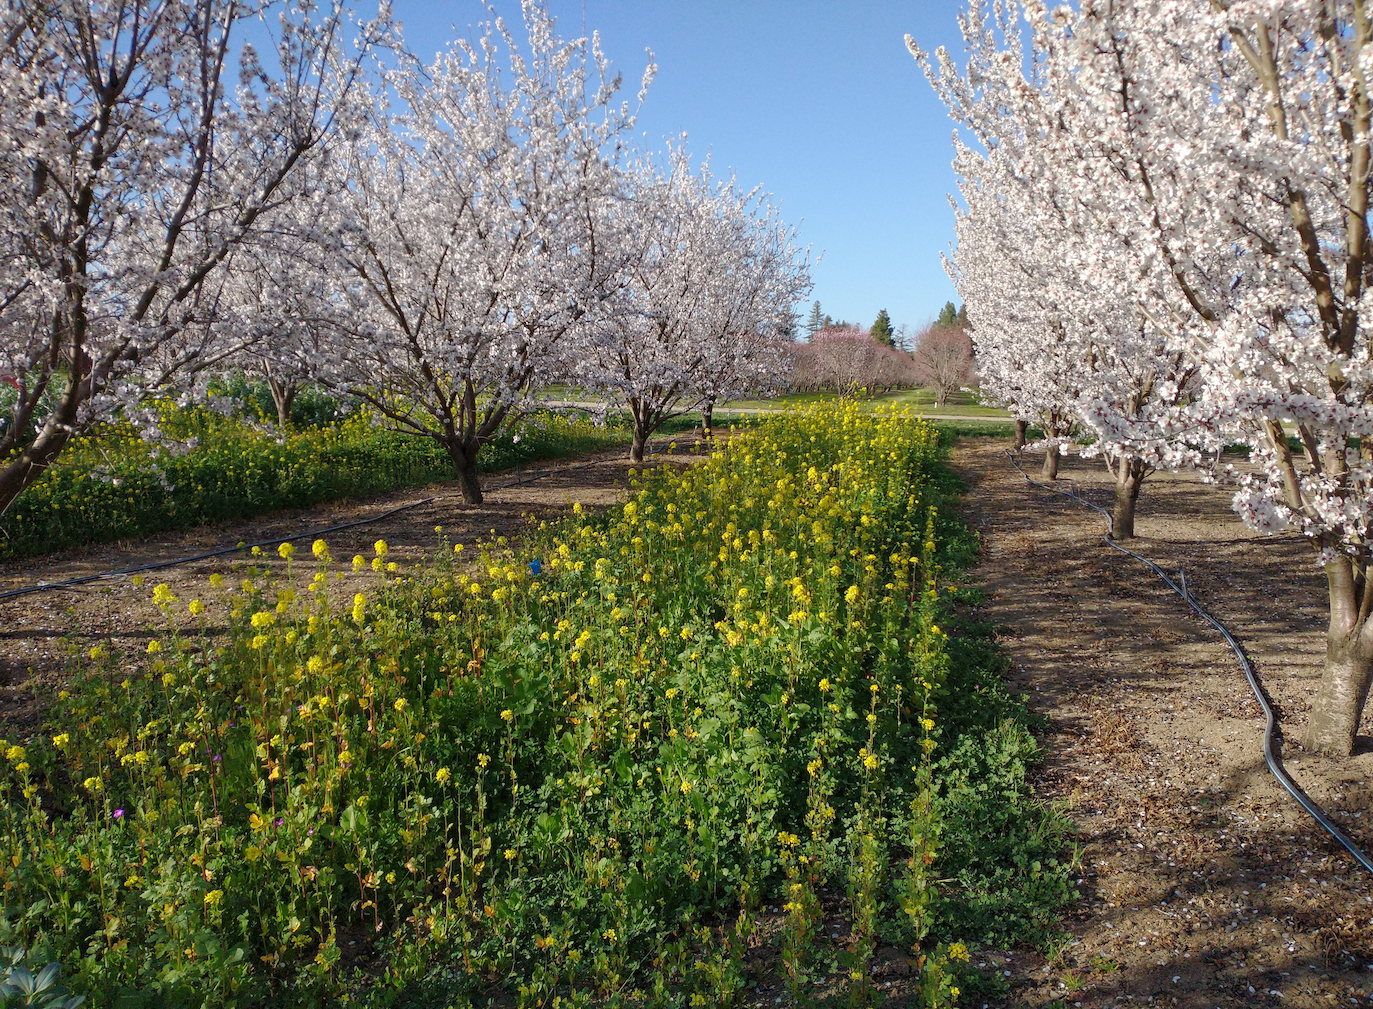 Growers invited to see the benefits of cover crops in orchards and vineyards